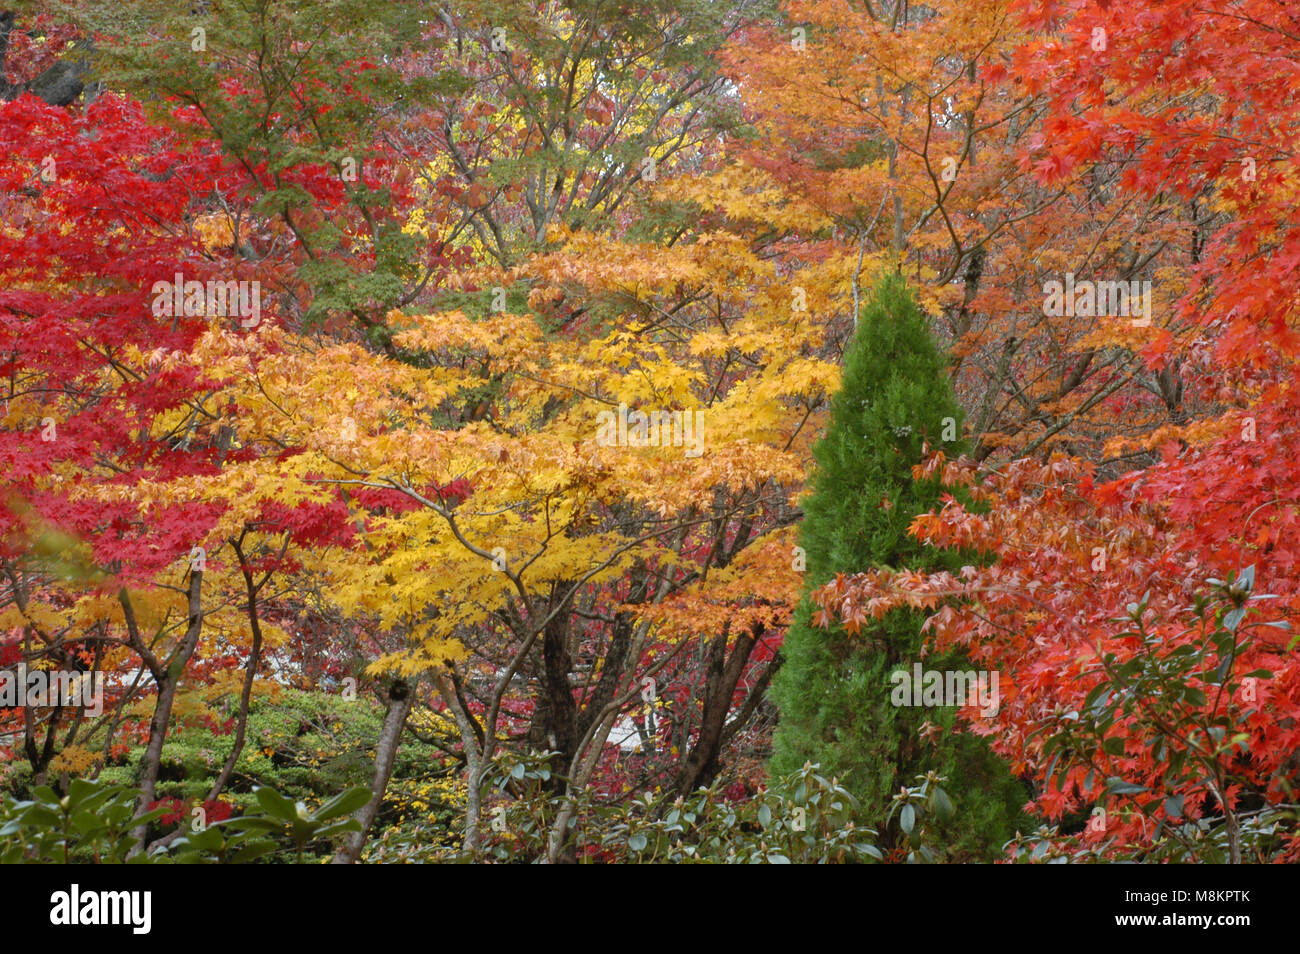 RED AND YELLOW AUTUMN FOLIAGE ON TREES IN THE BLUE MOUNTAINS, NEW SOUTH WALES, AUSTRALIA. Stock Photo